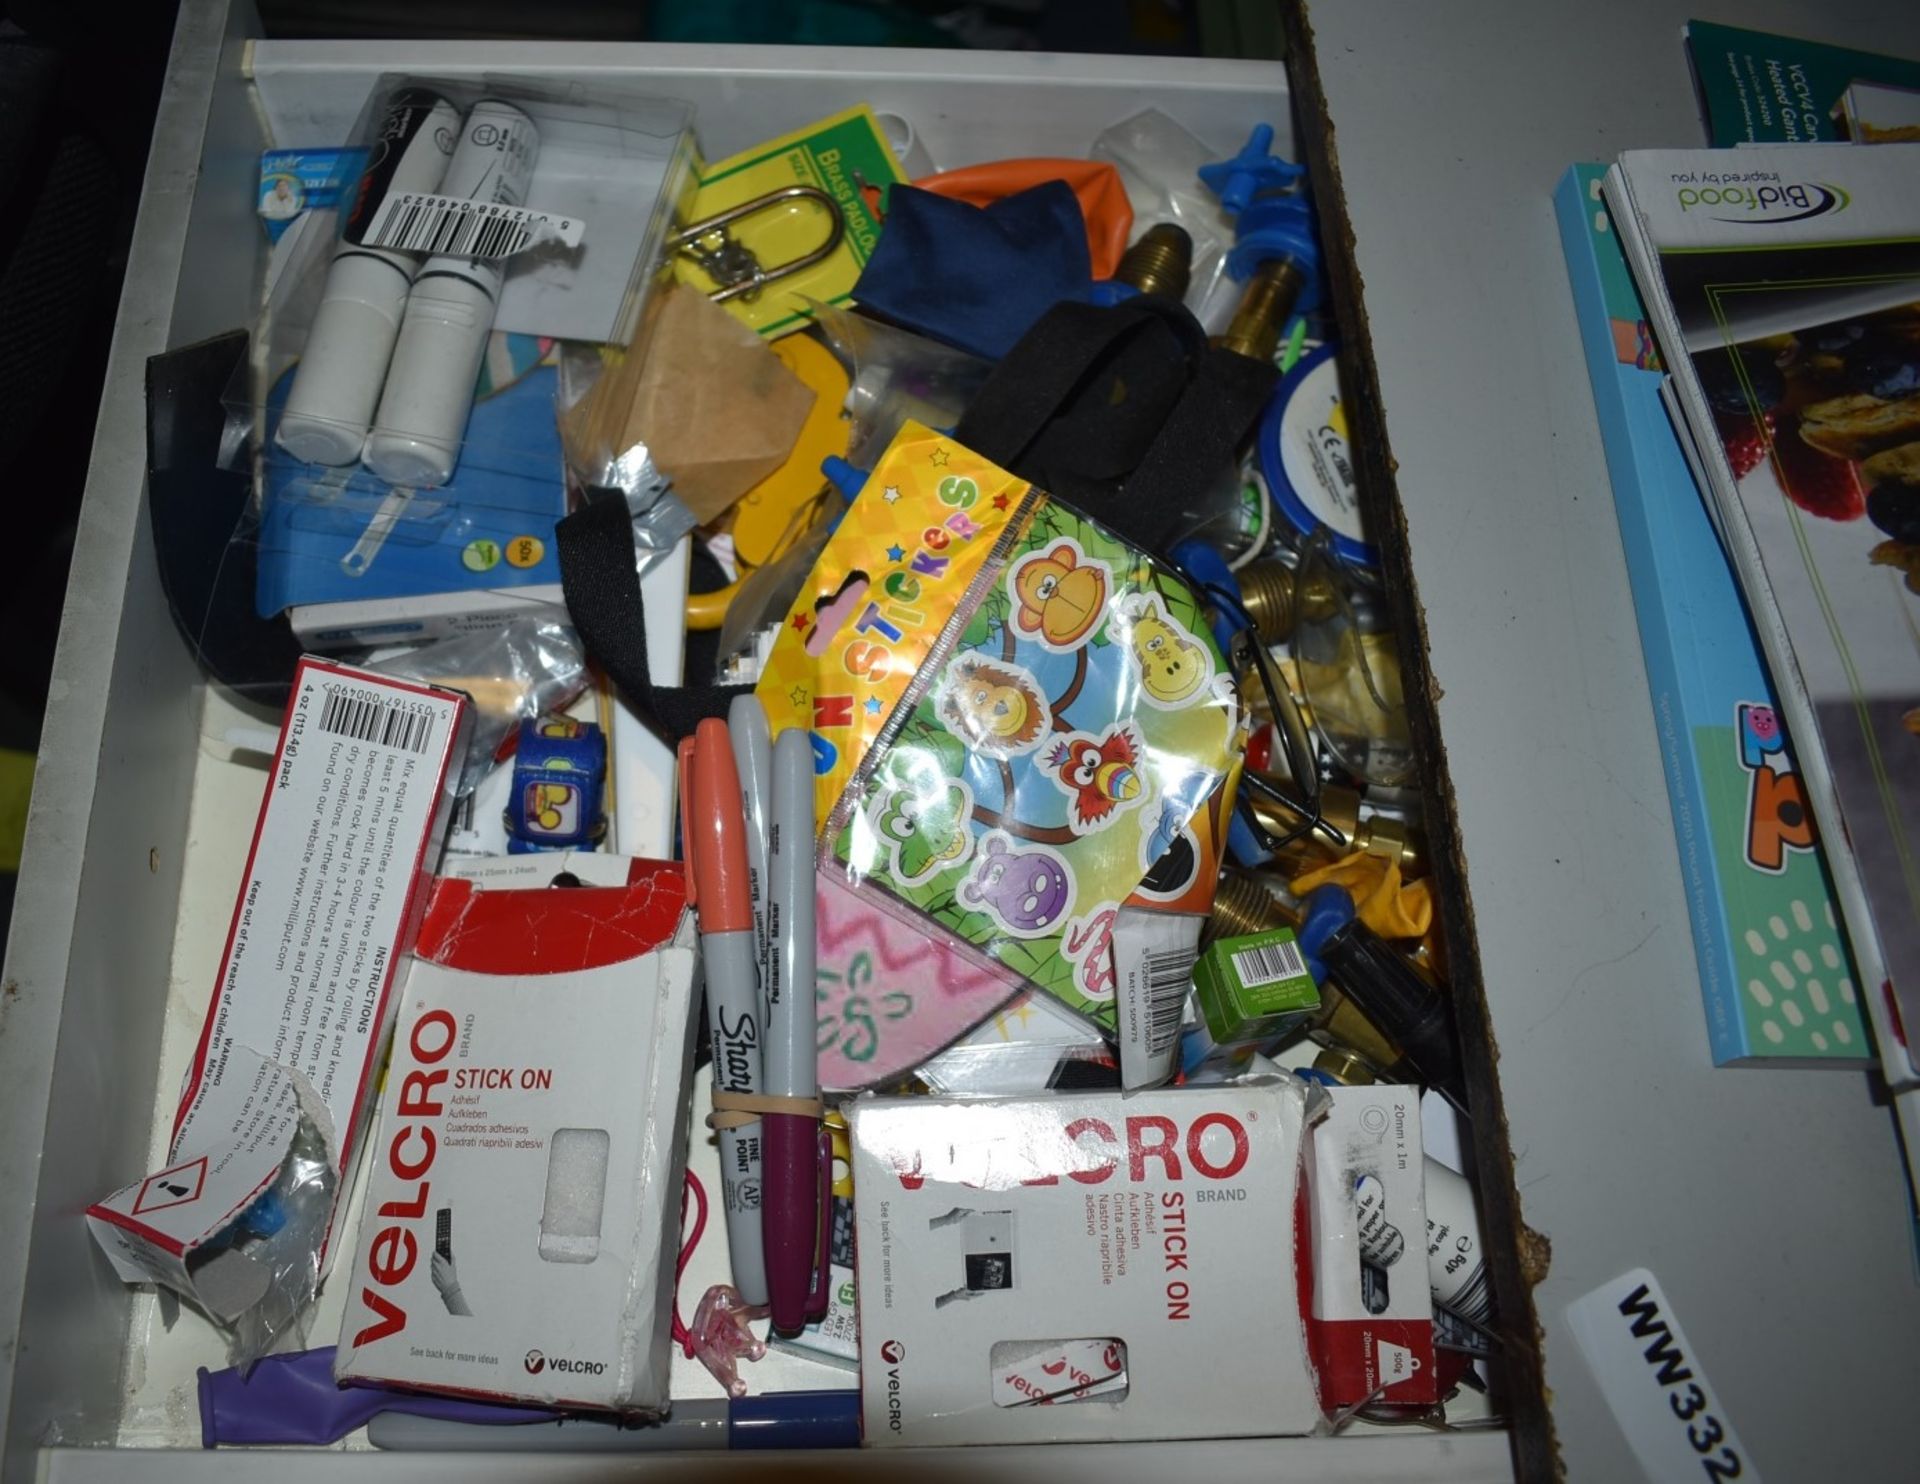 Assorted Job Lot From Office Room - Includes Stationary, Contents of Drawers, First Aid Kit, Party - Image 14 of 21